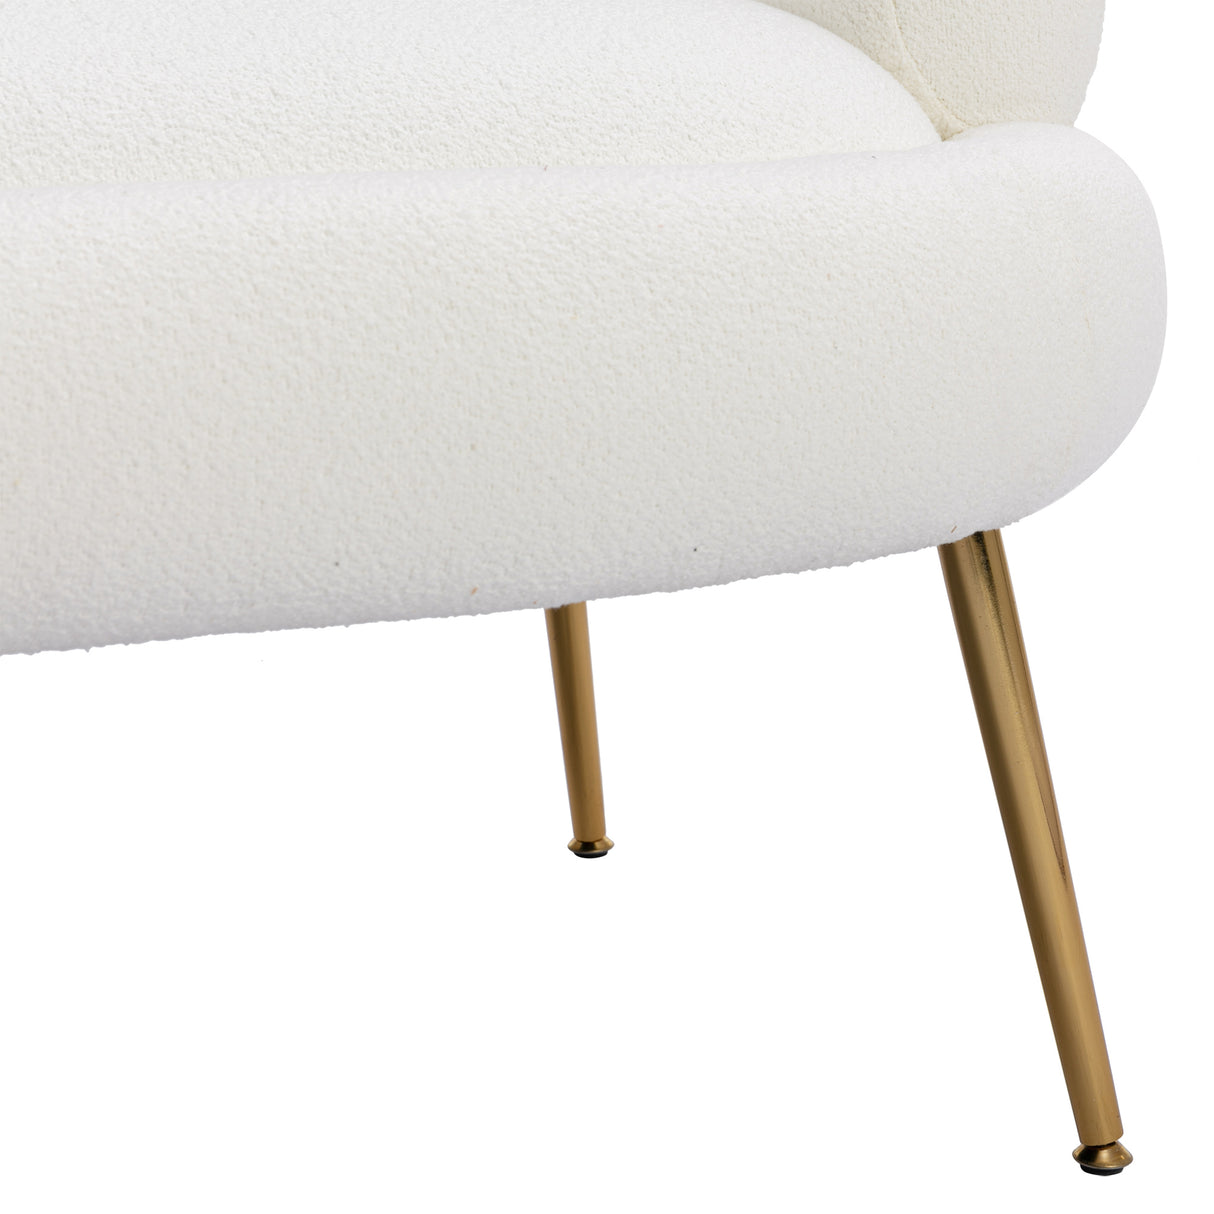 COOLMORE Accent  Chair  ,leisure sofa  with  Golden  feet - Home Elegance USA